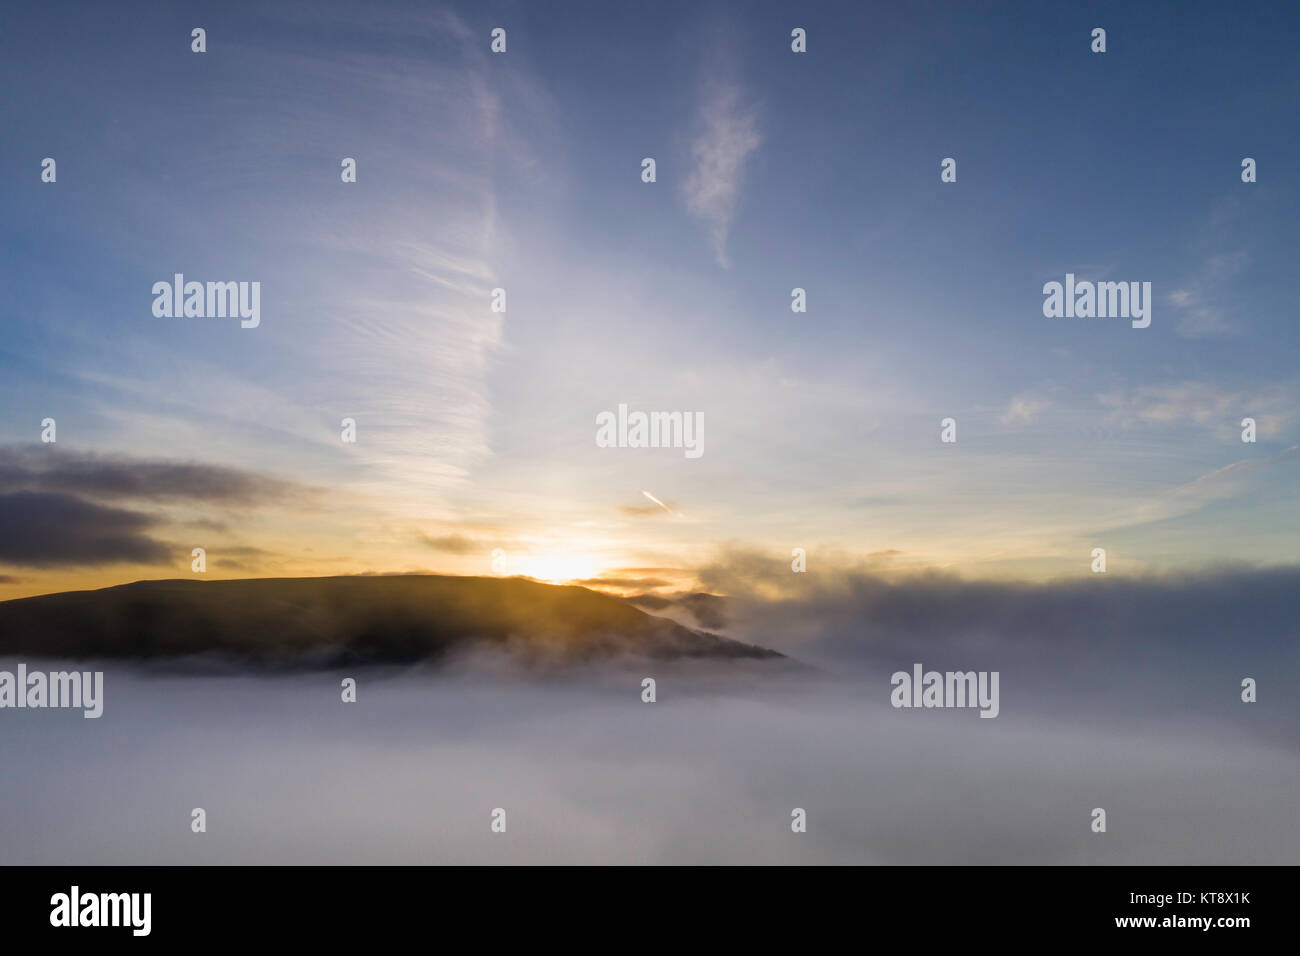 Keswick, UK. 22nd Dec, 2017. Drone aerial image of sunrise over the mist over Keswick Credit: Russell Millner/Alamy Live News Stock Photo